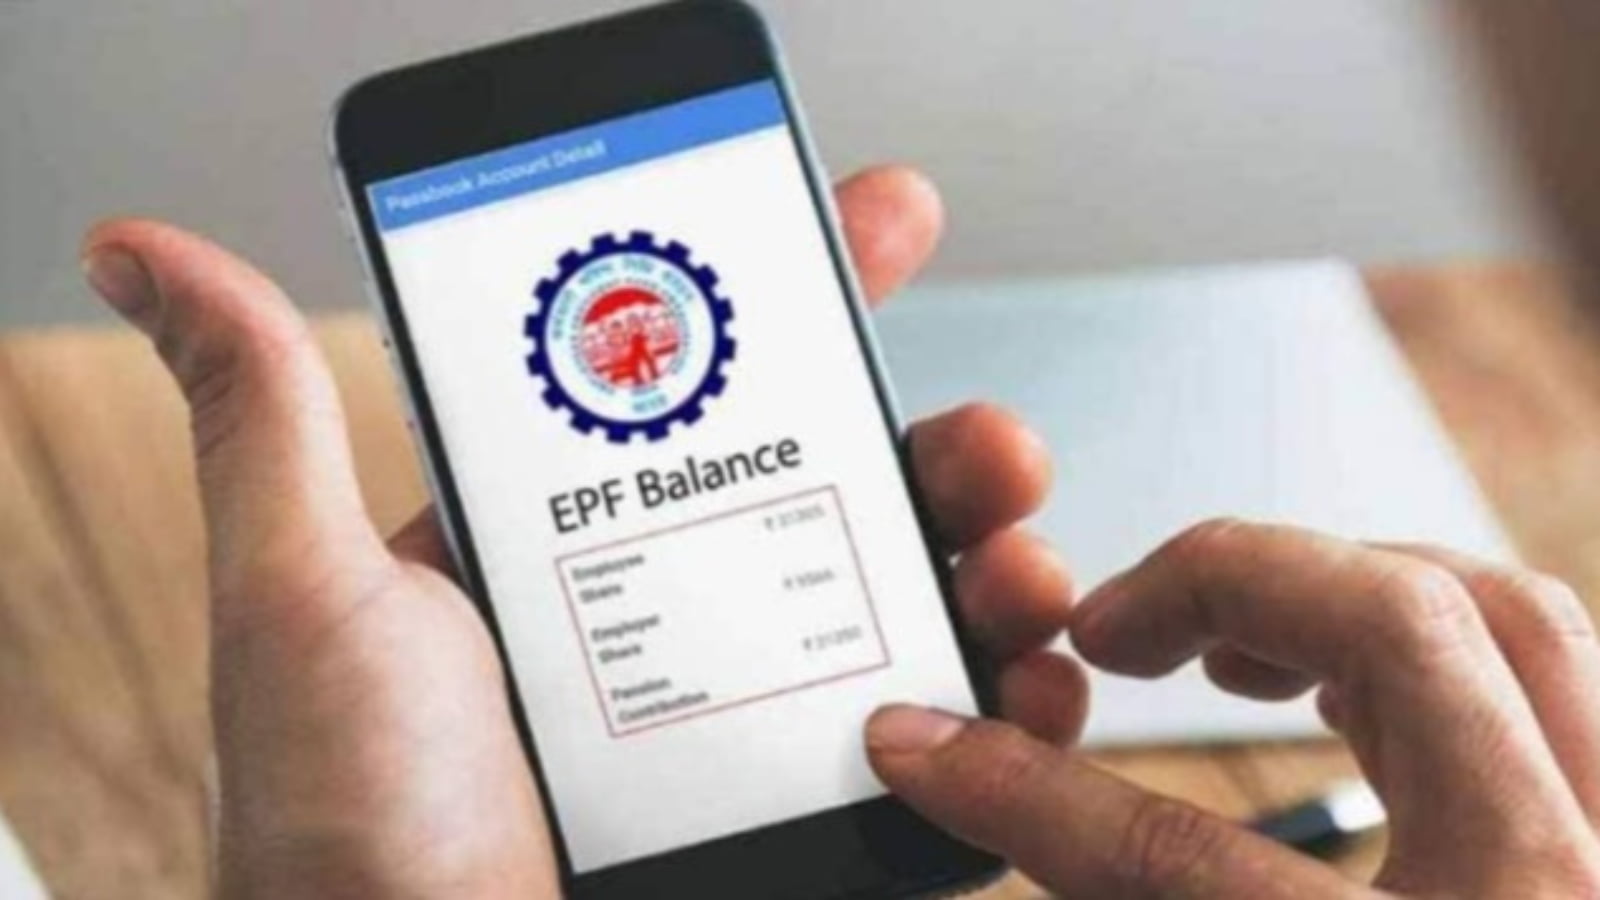 How To Check PF Balance Online: Here Are Some Ways To Check